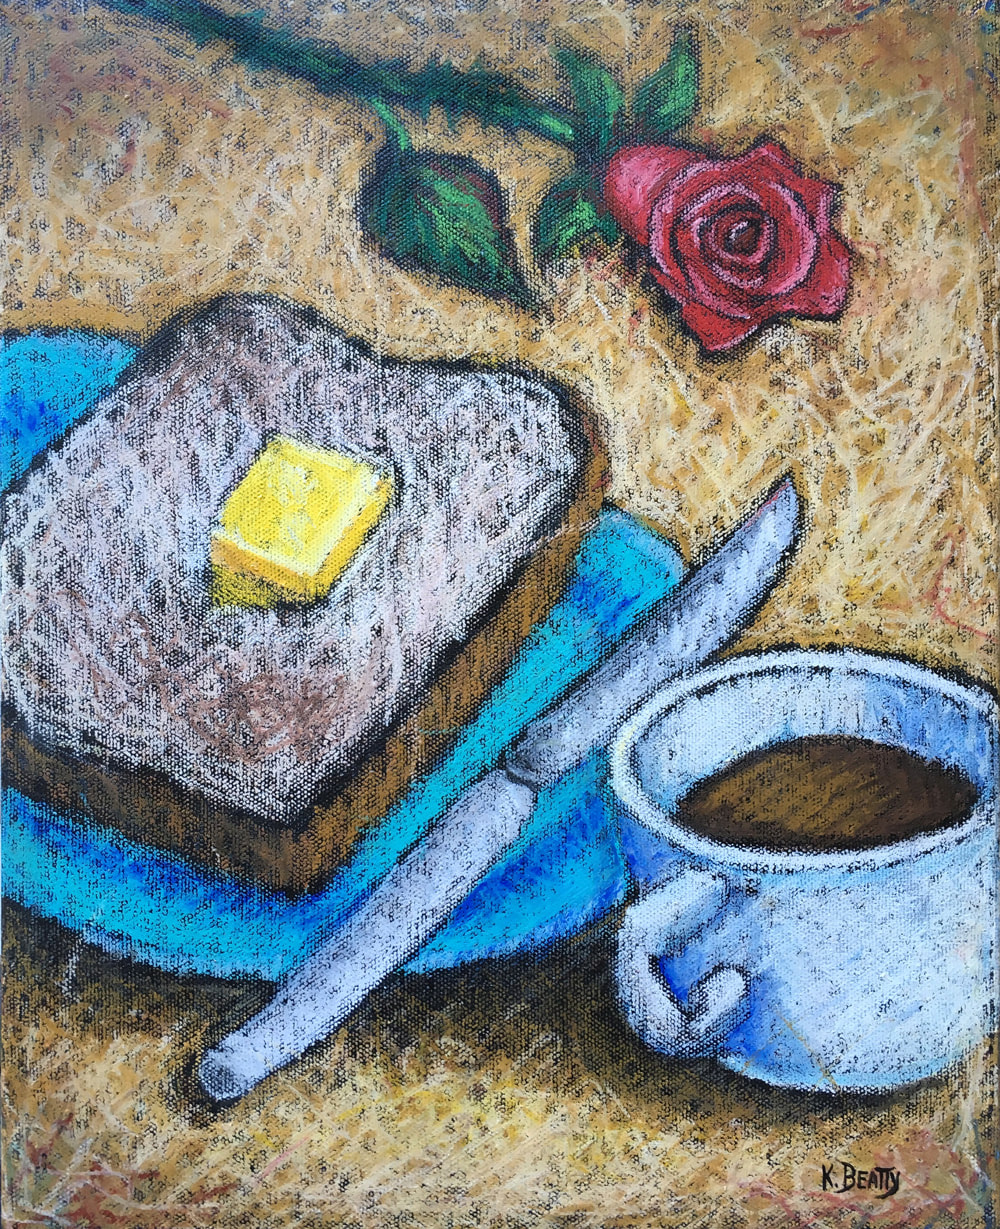 This oil pastel painting features a romantic breakfast of  tea and toast on a blue plate with a red rose nearby. Done in a unique oil pastel scribble technique.